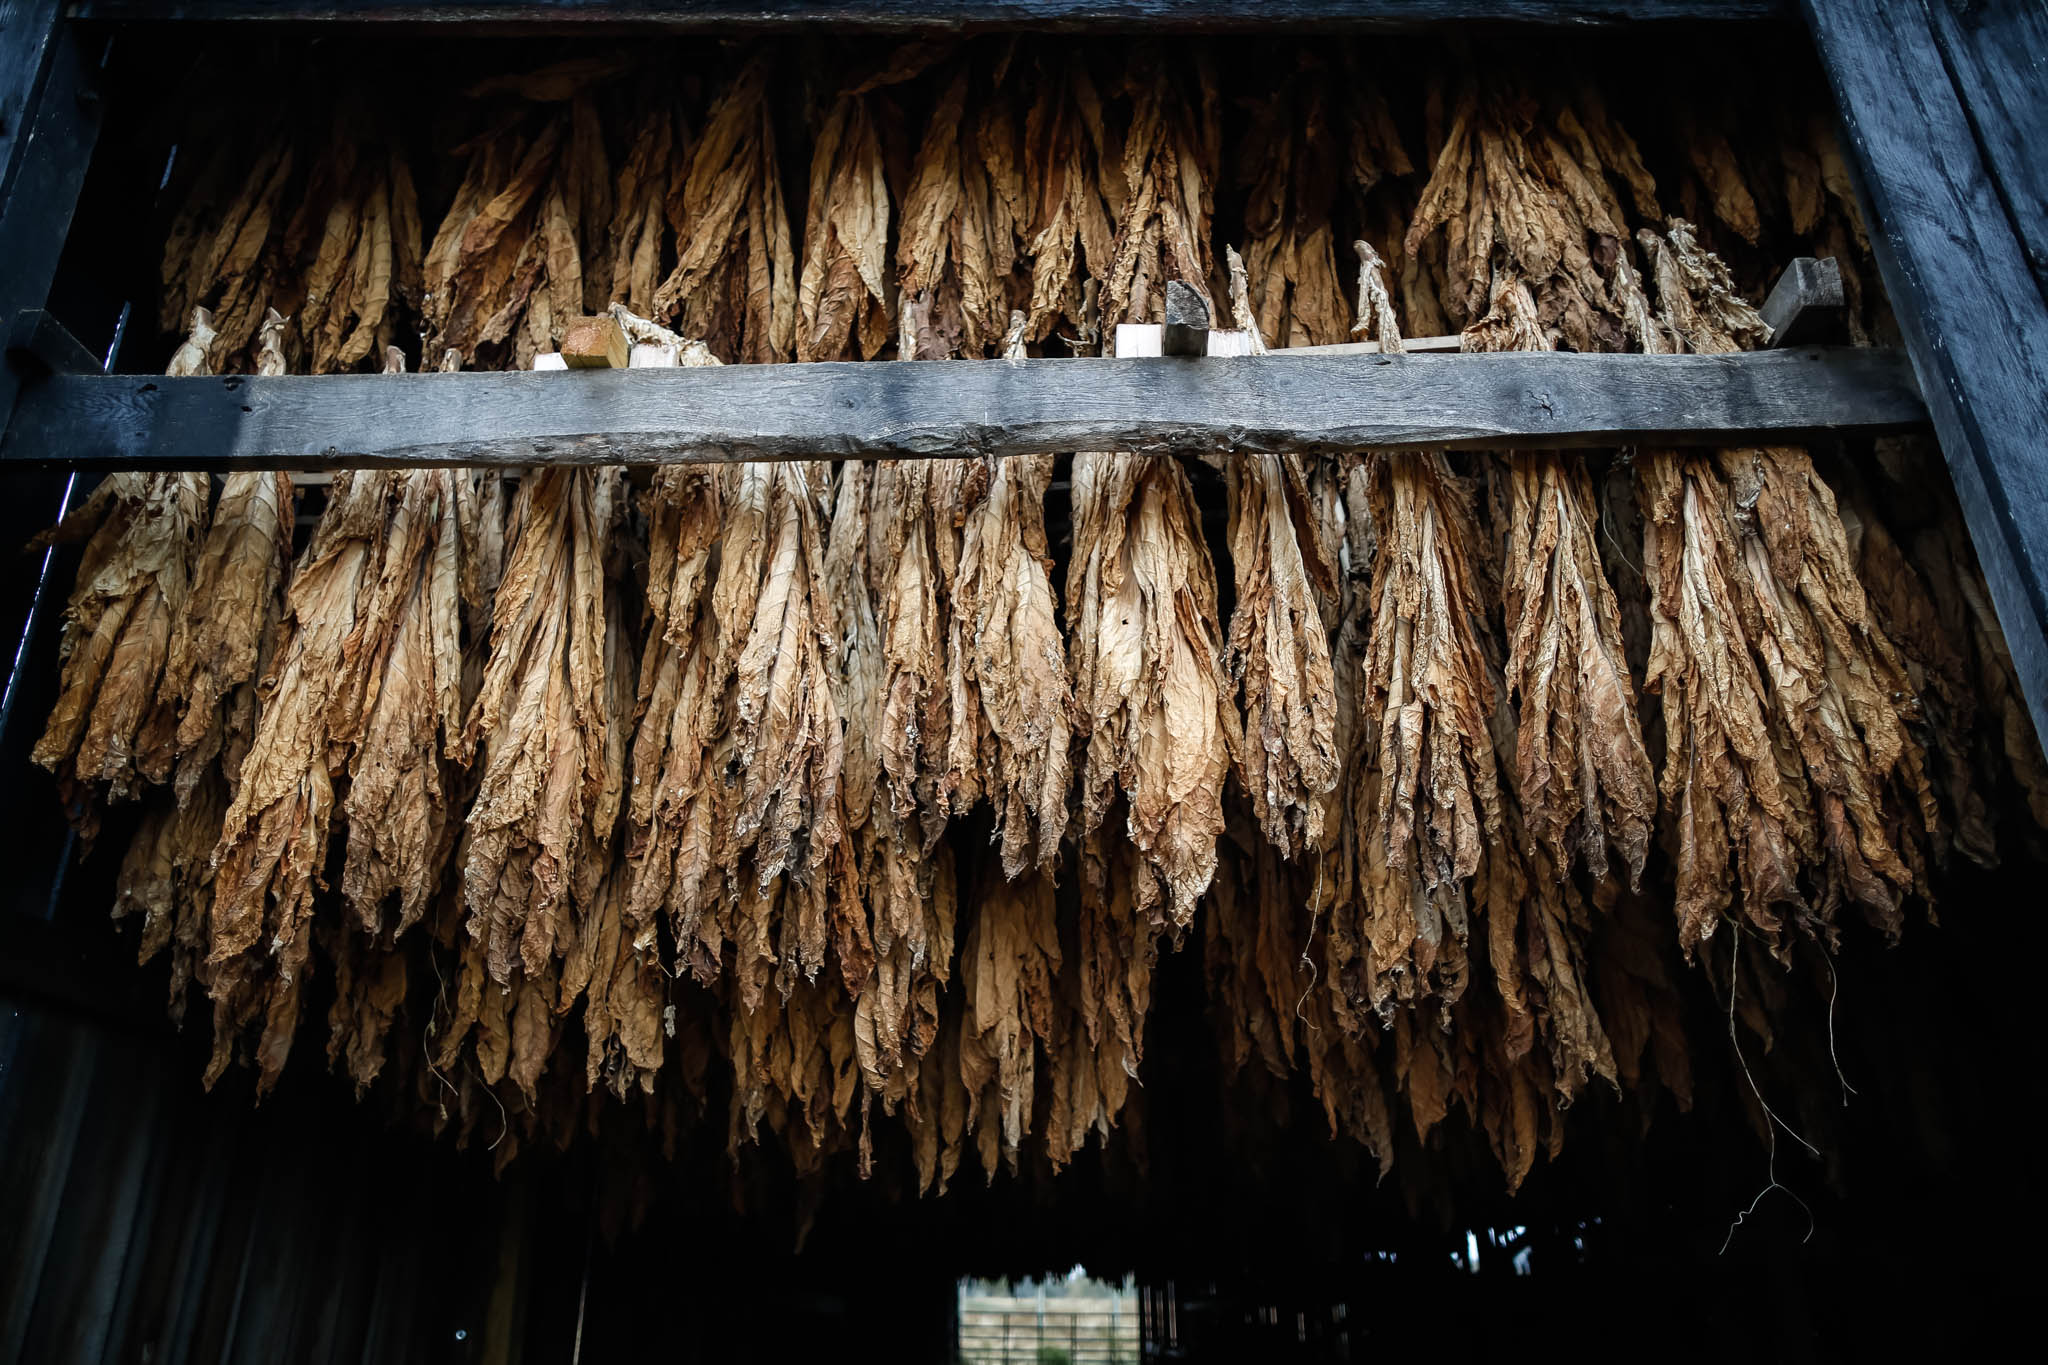  Tobacco stalks are hung upside down in the rafters of the barn to reduce moisture after harvesting. 